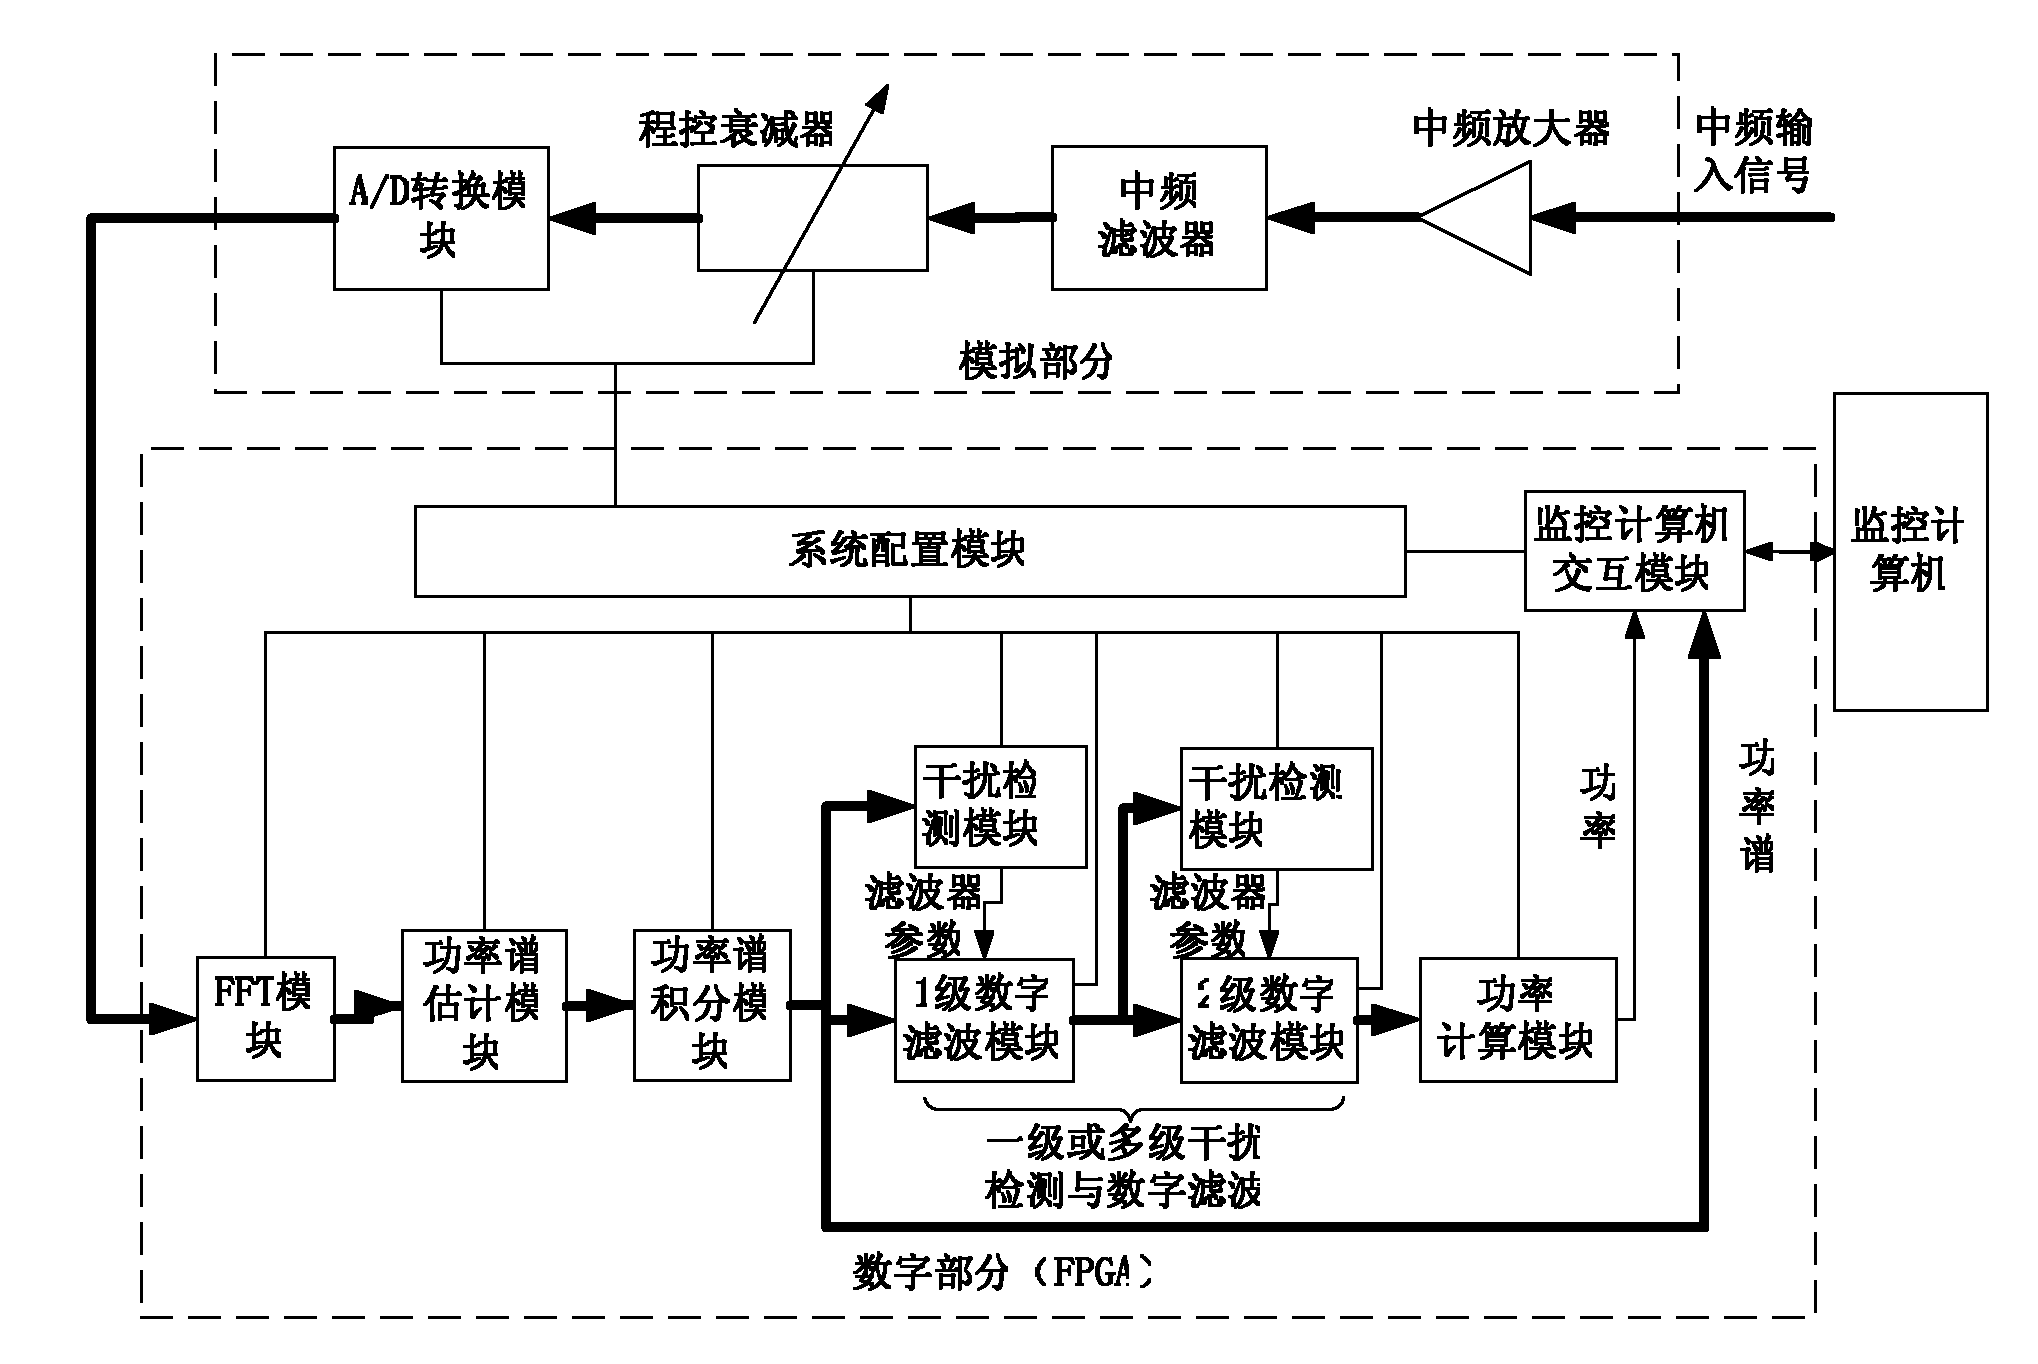 Broadband microwave power meter and interference signal filtering method